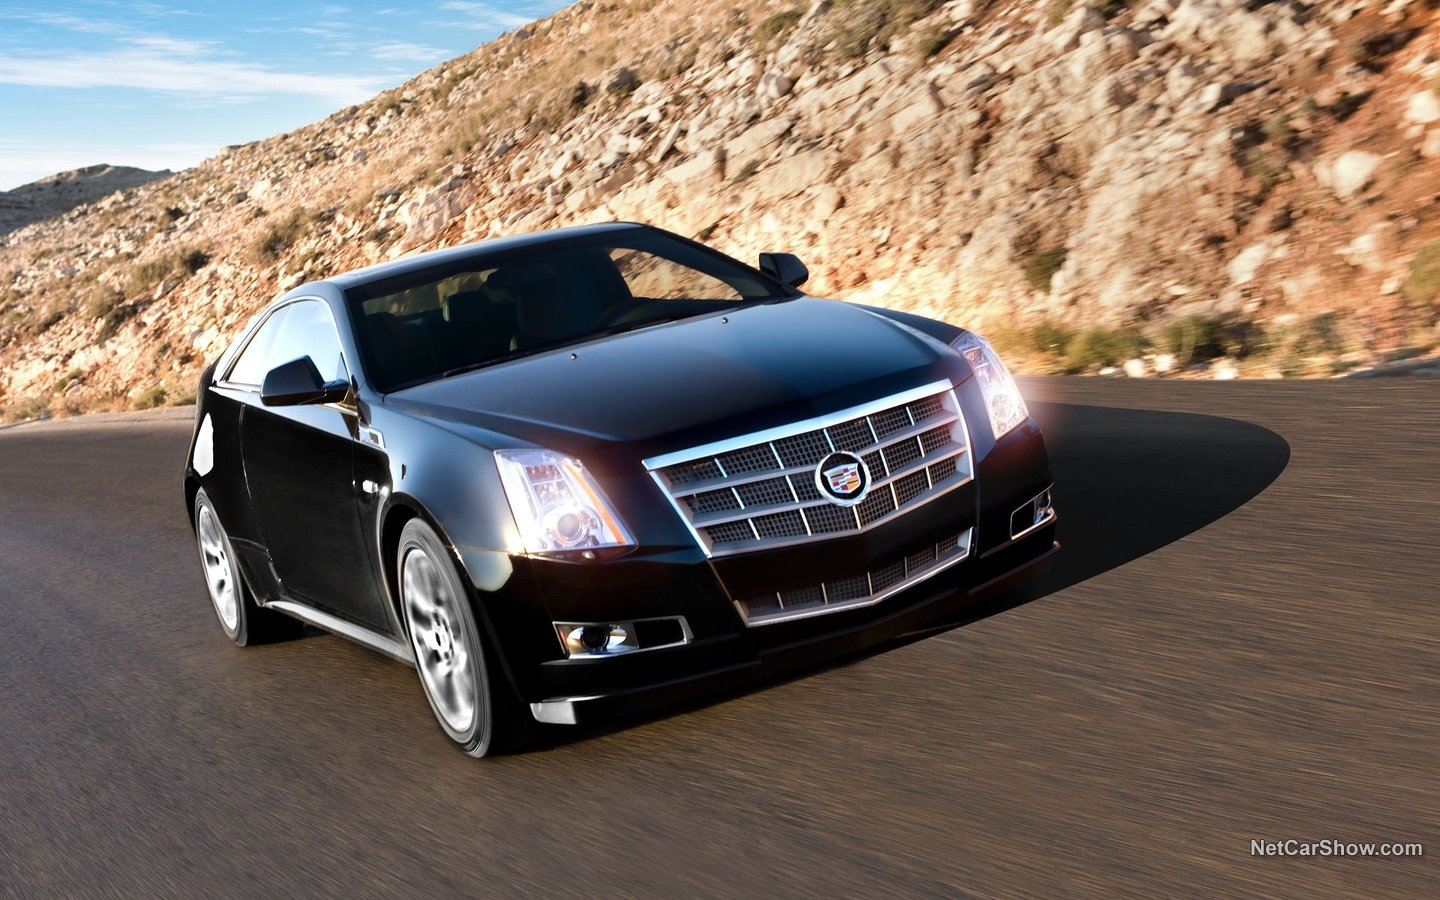 Cadillac CTS Coupe 2011 5a7490c0